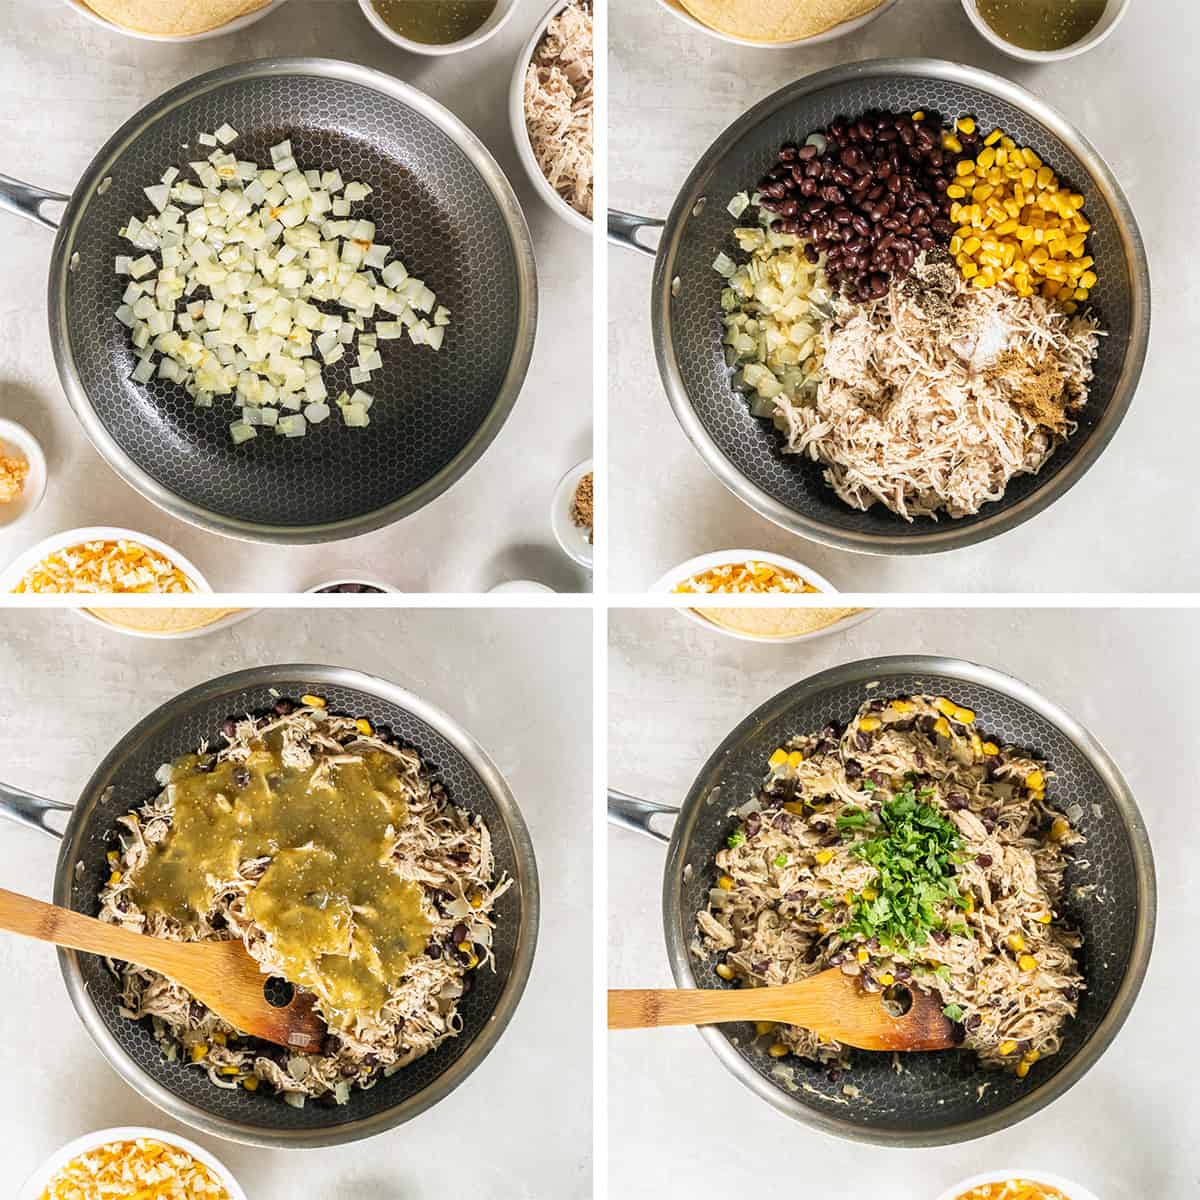 Four images of chicken taco filling with black beans and salsa verde being cooked in a skillet.